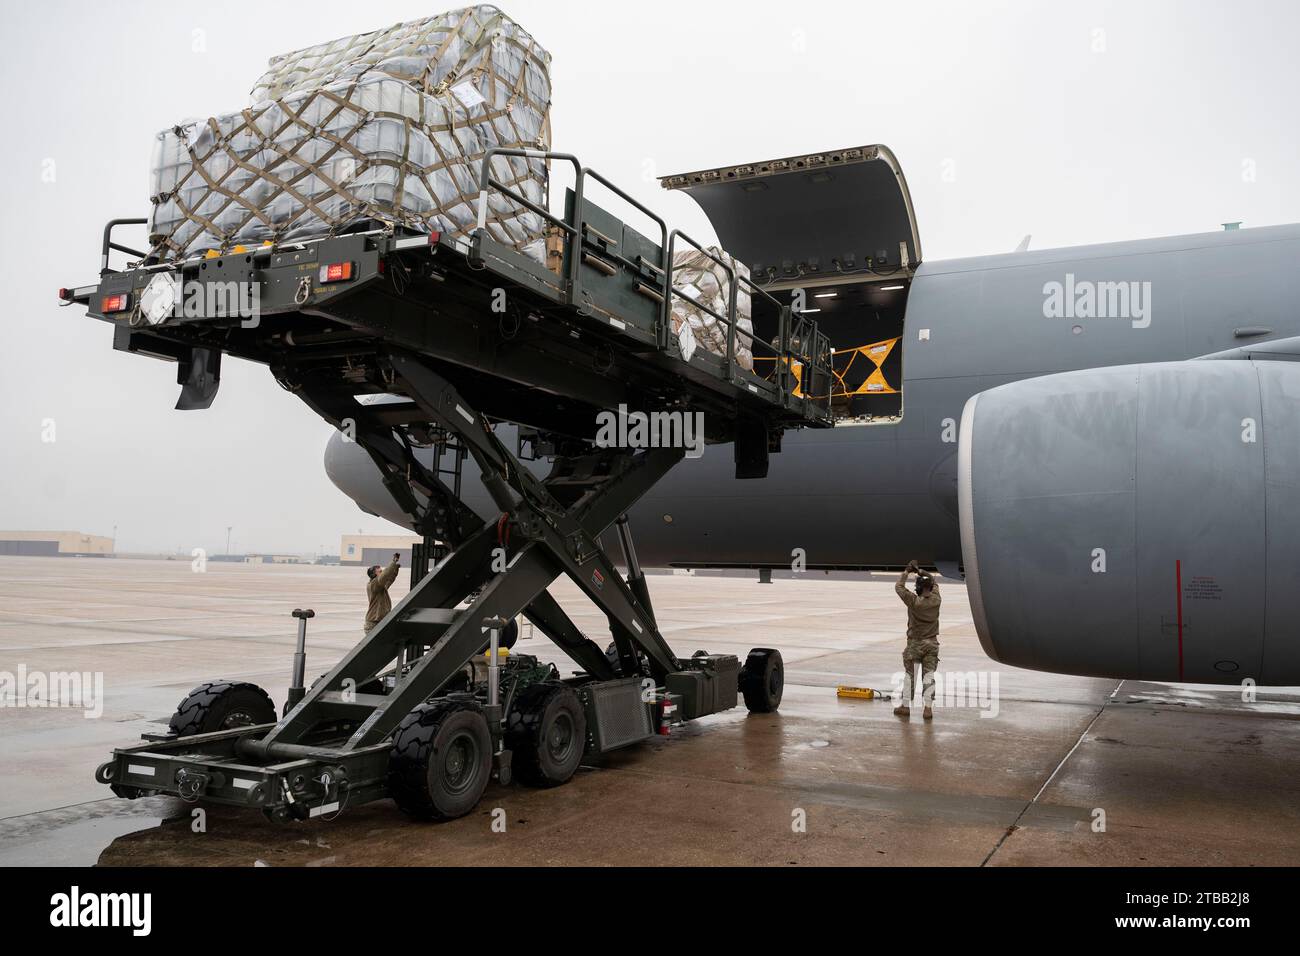 U.S. Air Force members assigned to the 509th Logistics Readiness Squadron transport supplies to load onto a KC-46 Pegasus aircraft assigned to the 18th Air Refueling Squadron at Whiteman Air Force Base, Mo., Dec. 1, 2023. This was the first cargo upload of a KC-46 at Whiteman AFB. The cargo upload was conducted in support of the Denton Humanitarian Assistance Program. (U.S. Air Force photo by Tech. Sgt. Anthony Hetlage) Stock Photo